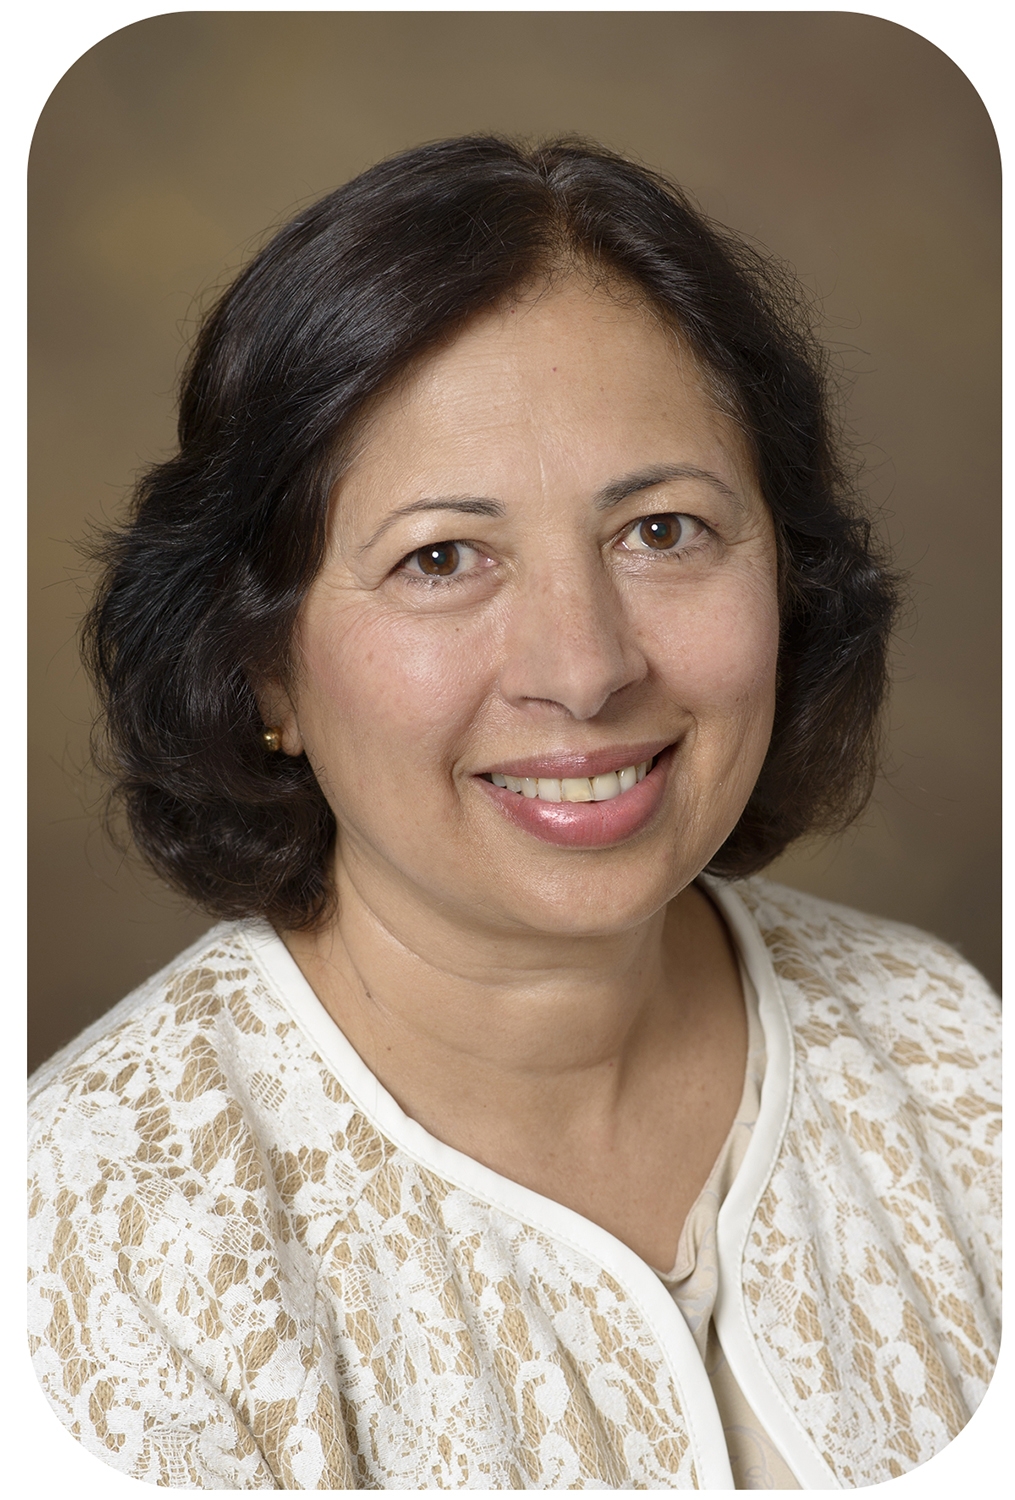 Deepa Khushlani, MD Medical Director of the Child & Adolescent Clinic